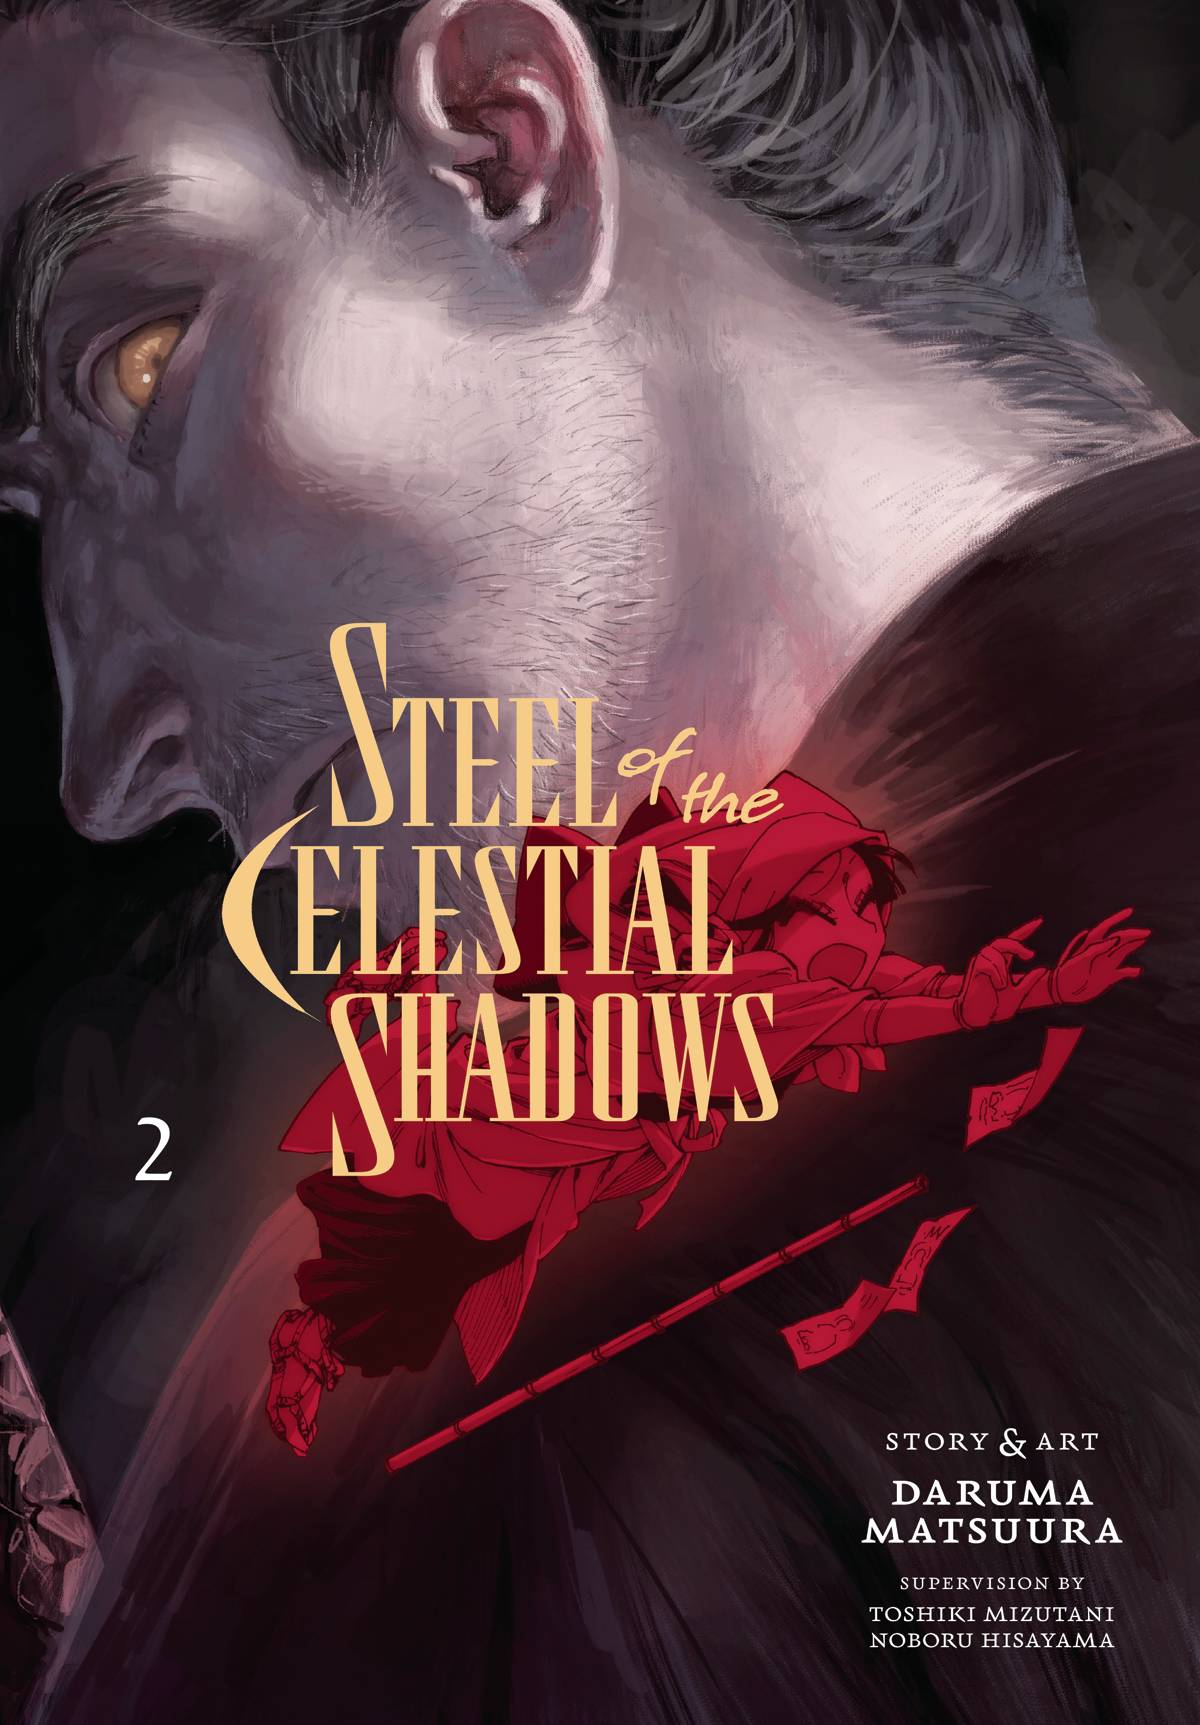 STEEL OF THE CELESTIAL SHADOWS GN VOL 02